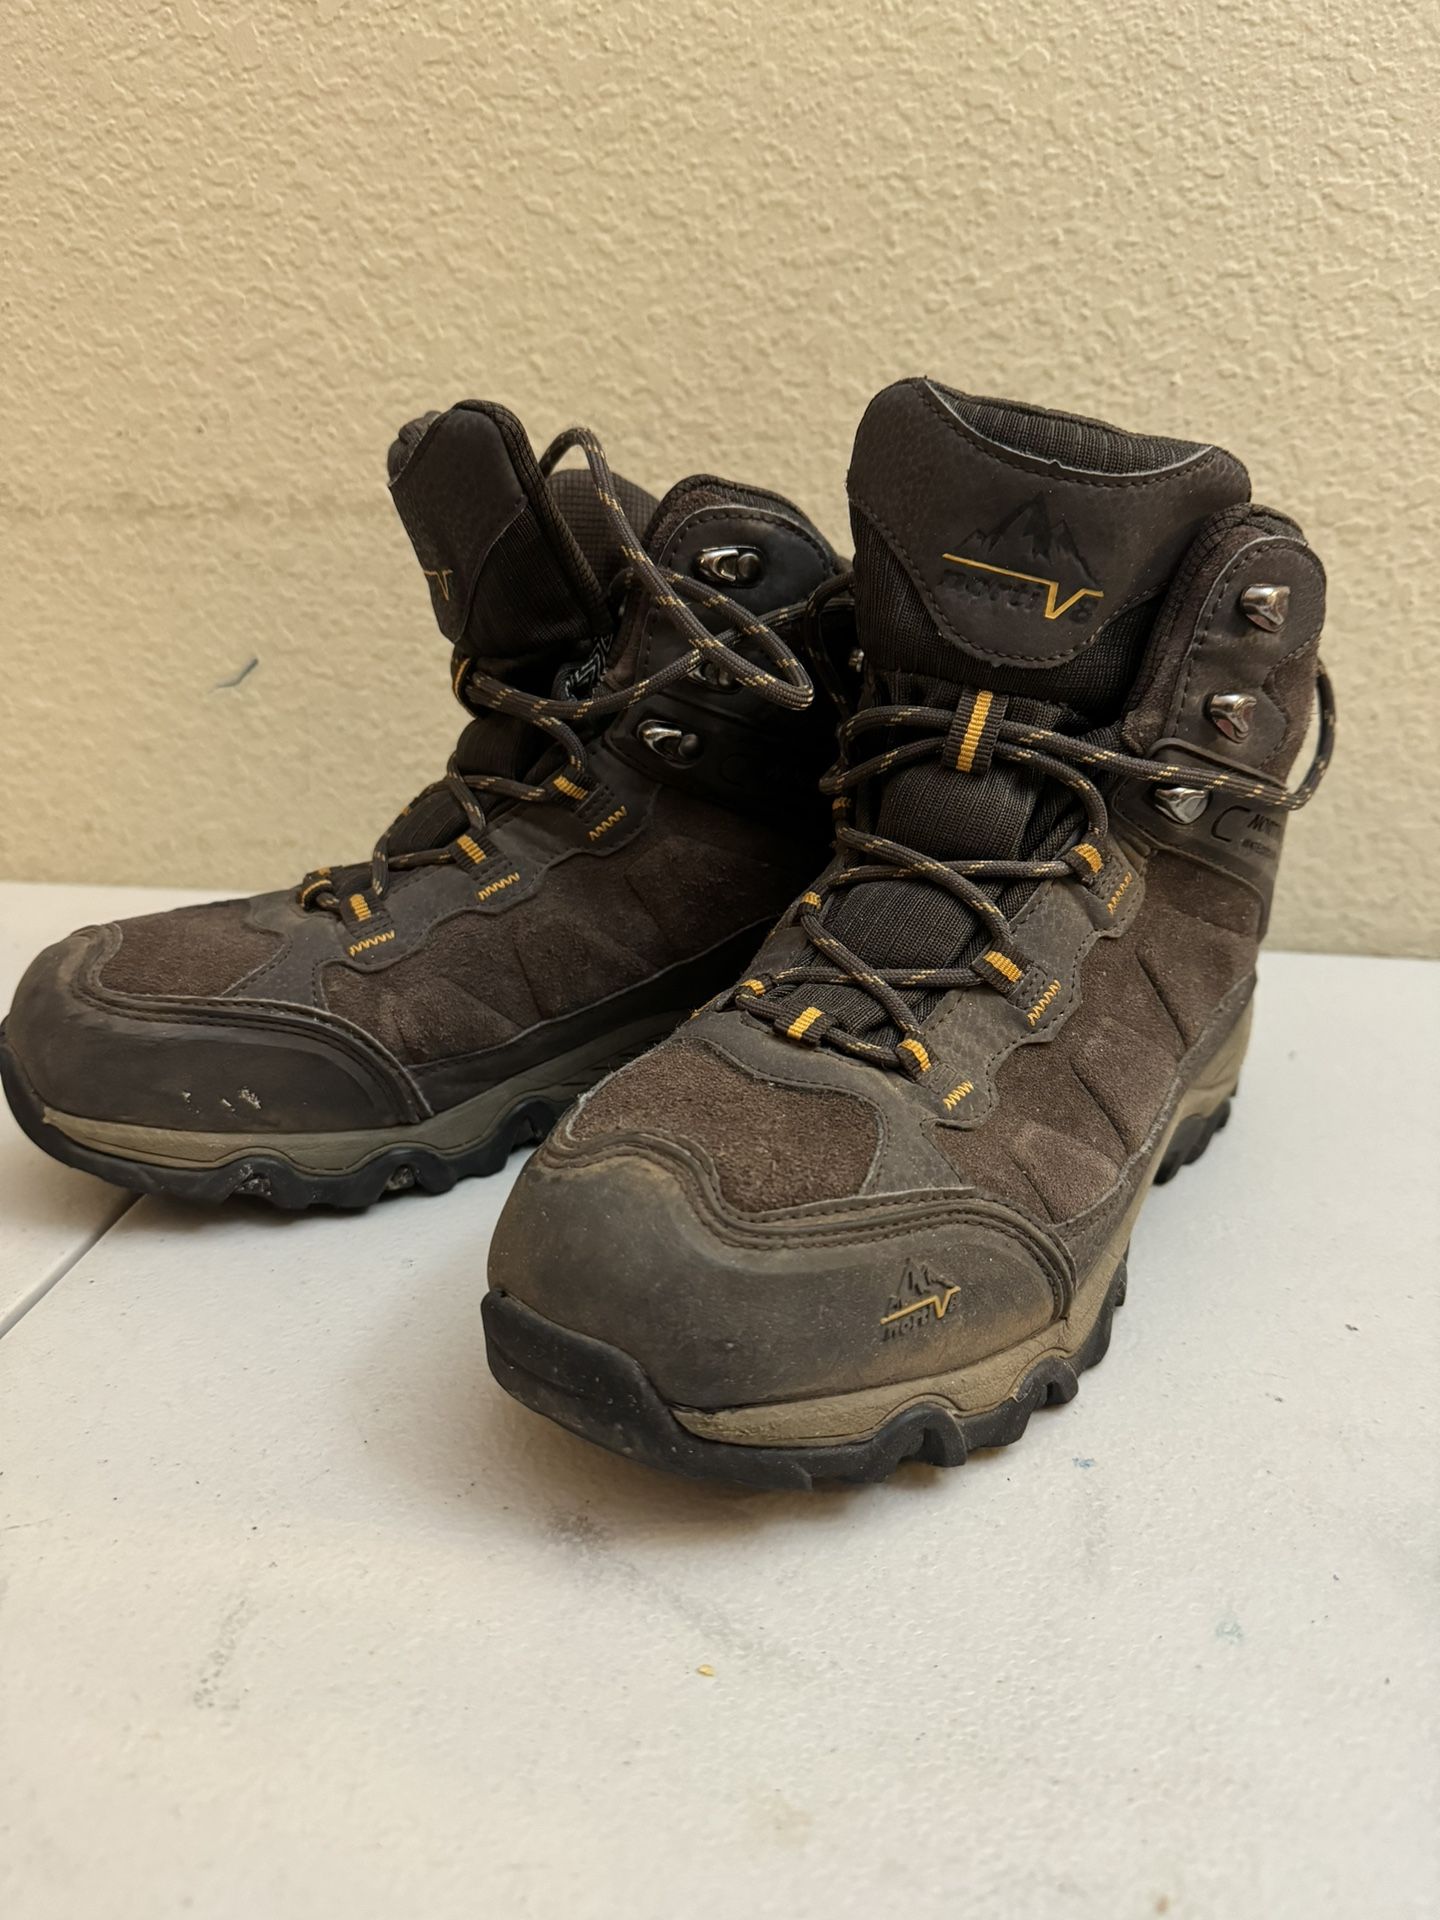 Size 7.5 boys hiking shoes Hiking Boots. 